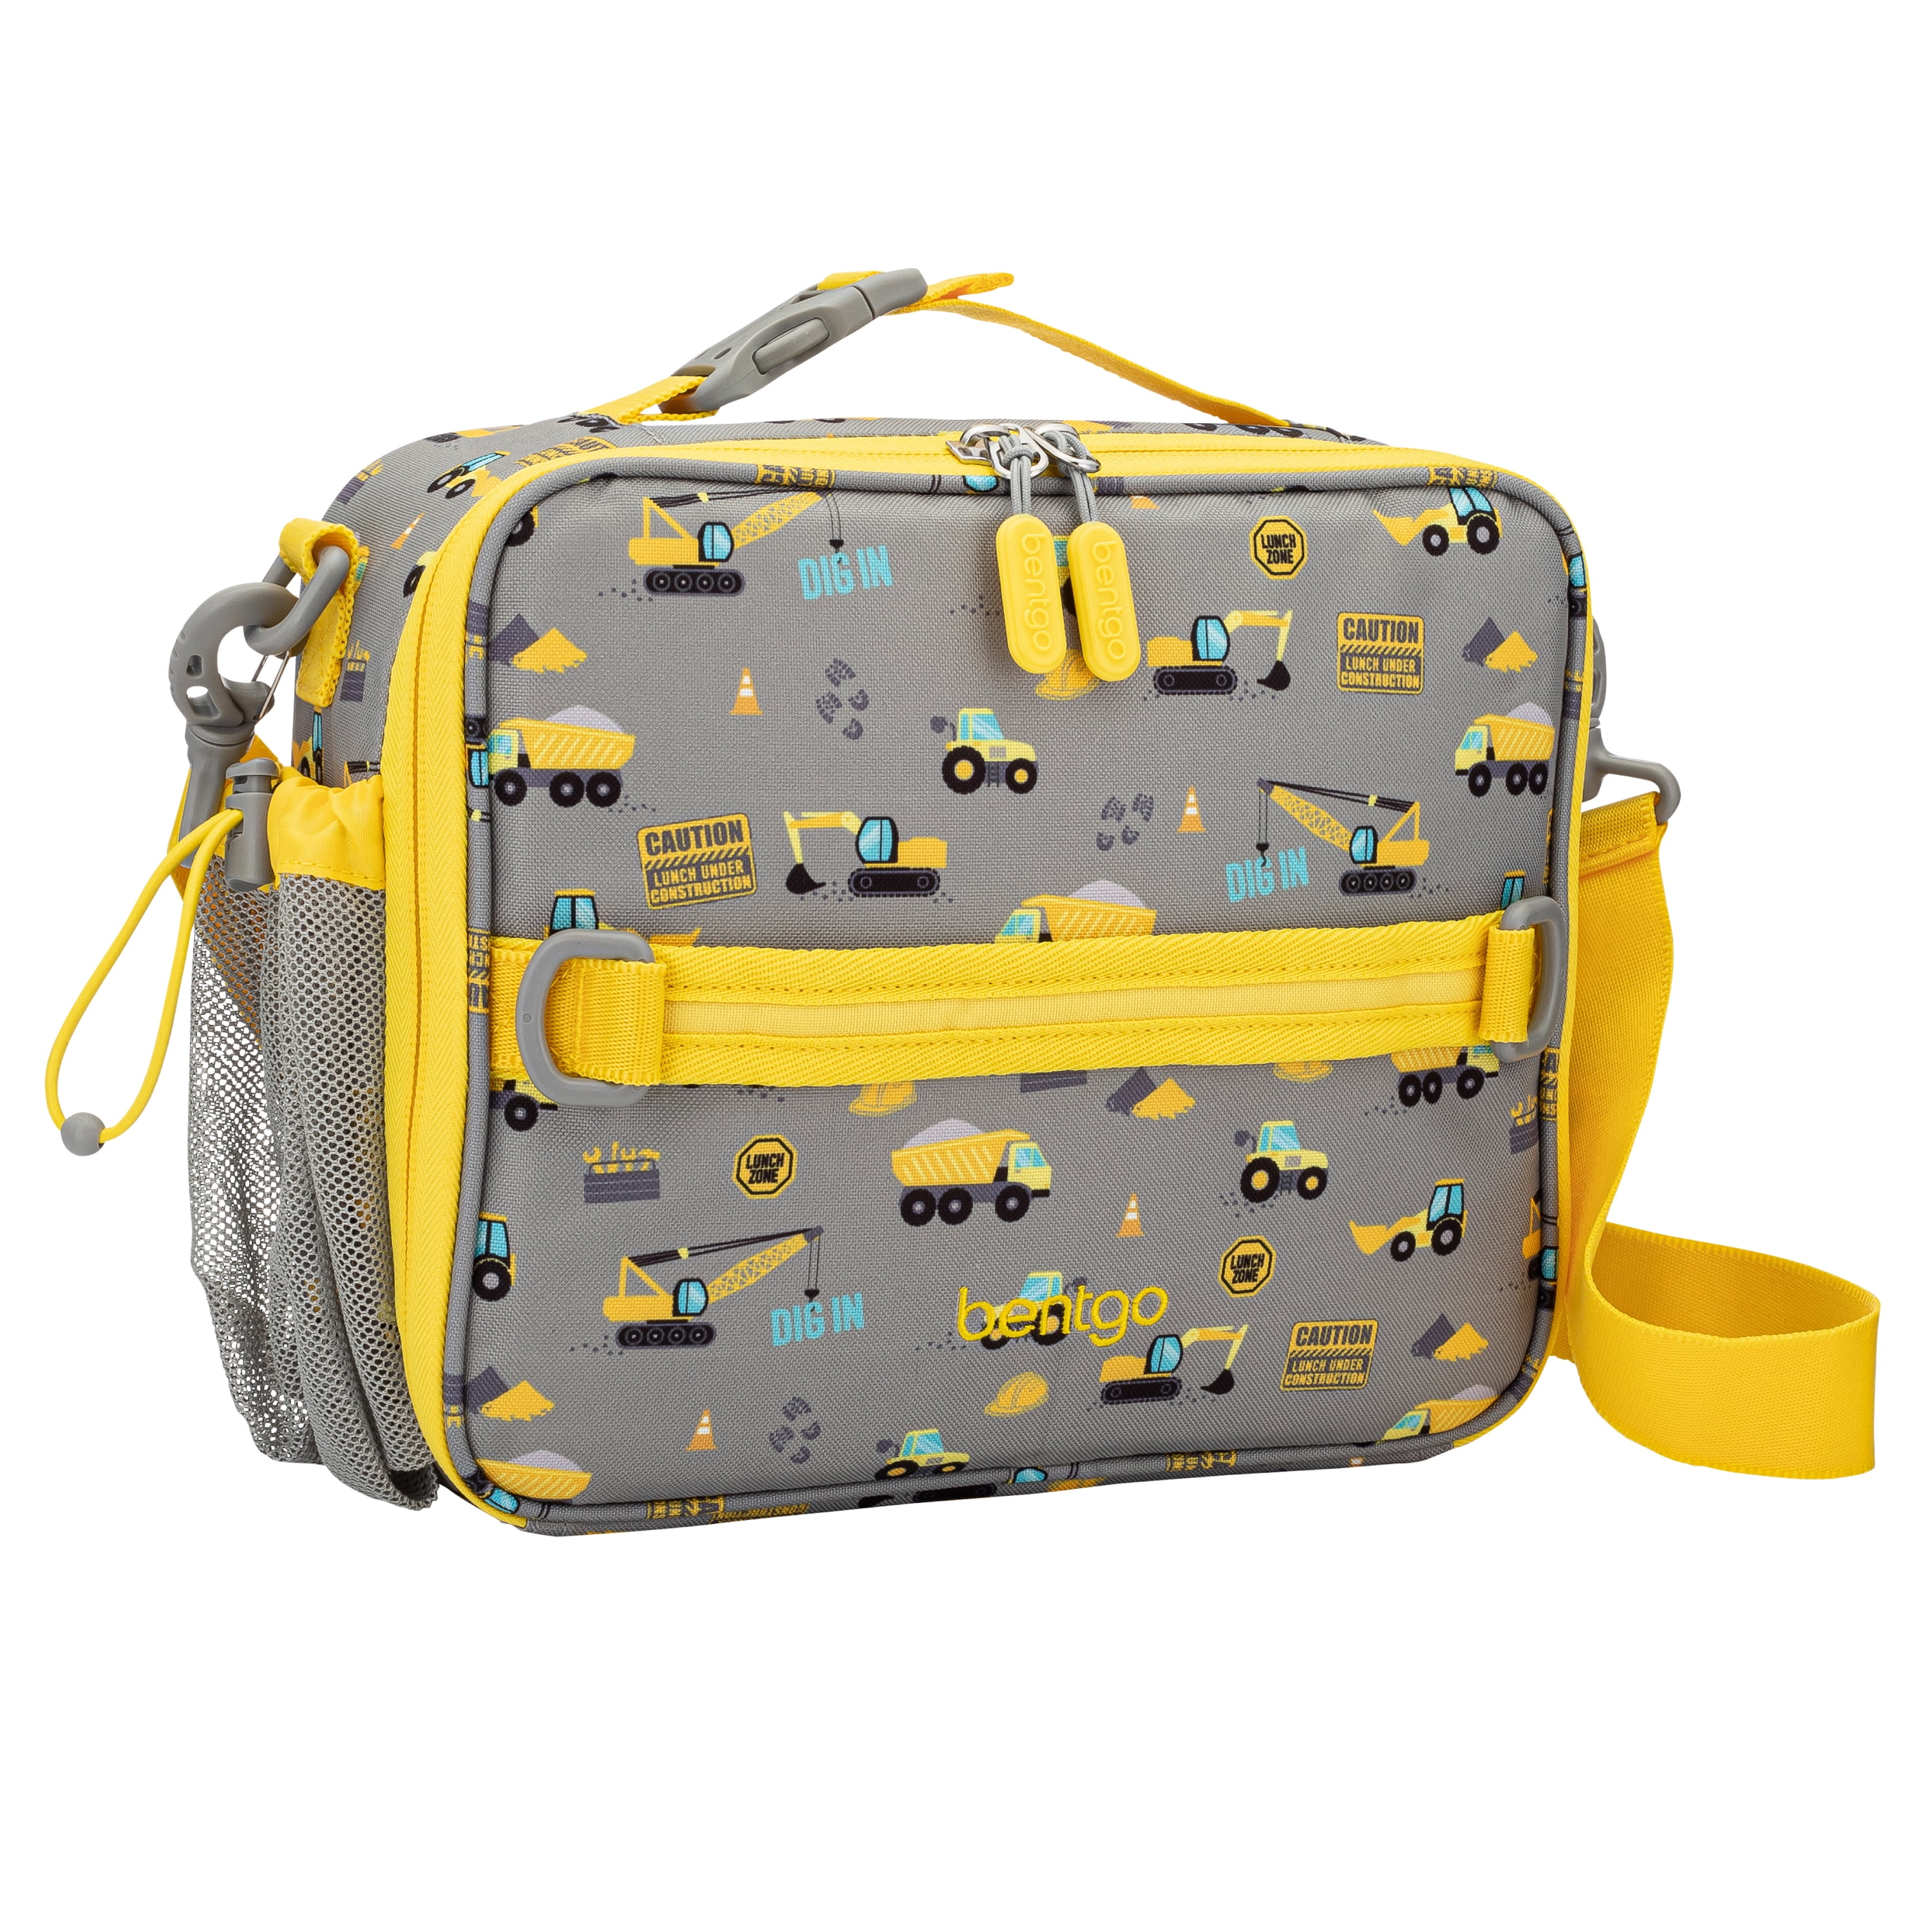 Bentgo Kids' Prints Double Insulated Lunch Bag, Durable, Water-Resistant Fabric, Bottle Holder - Construction Trucks